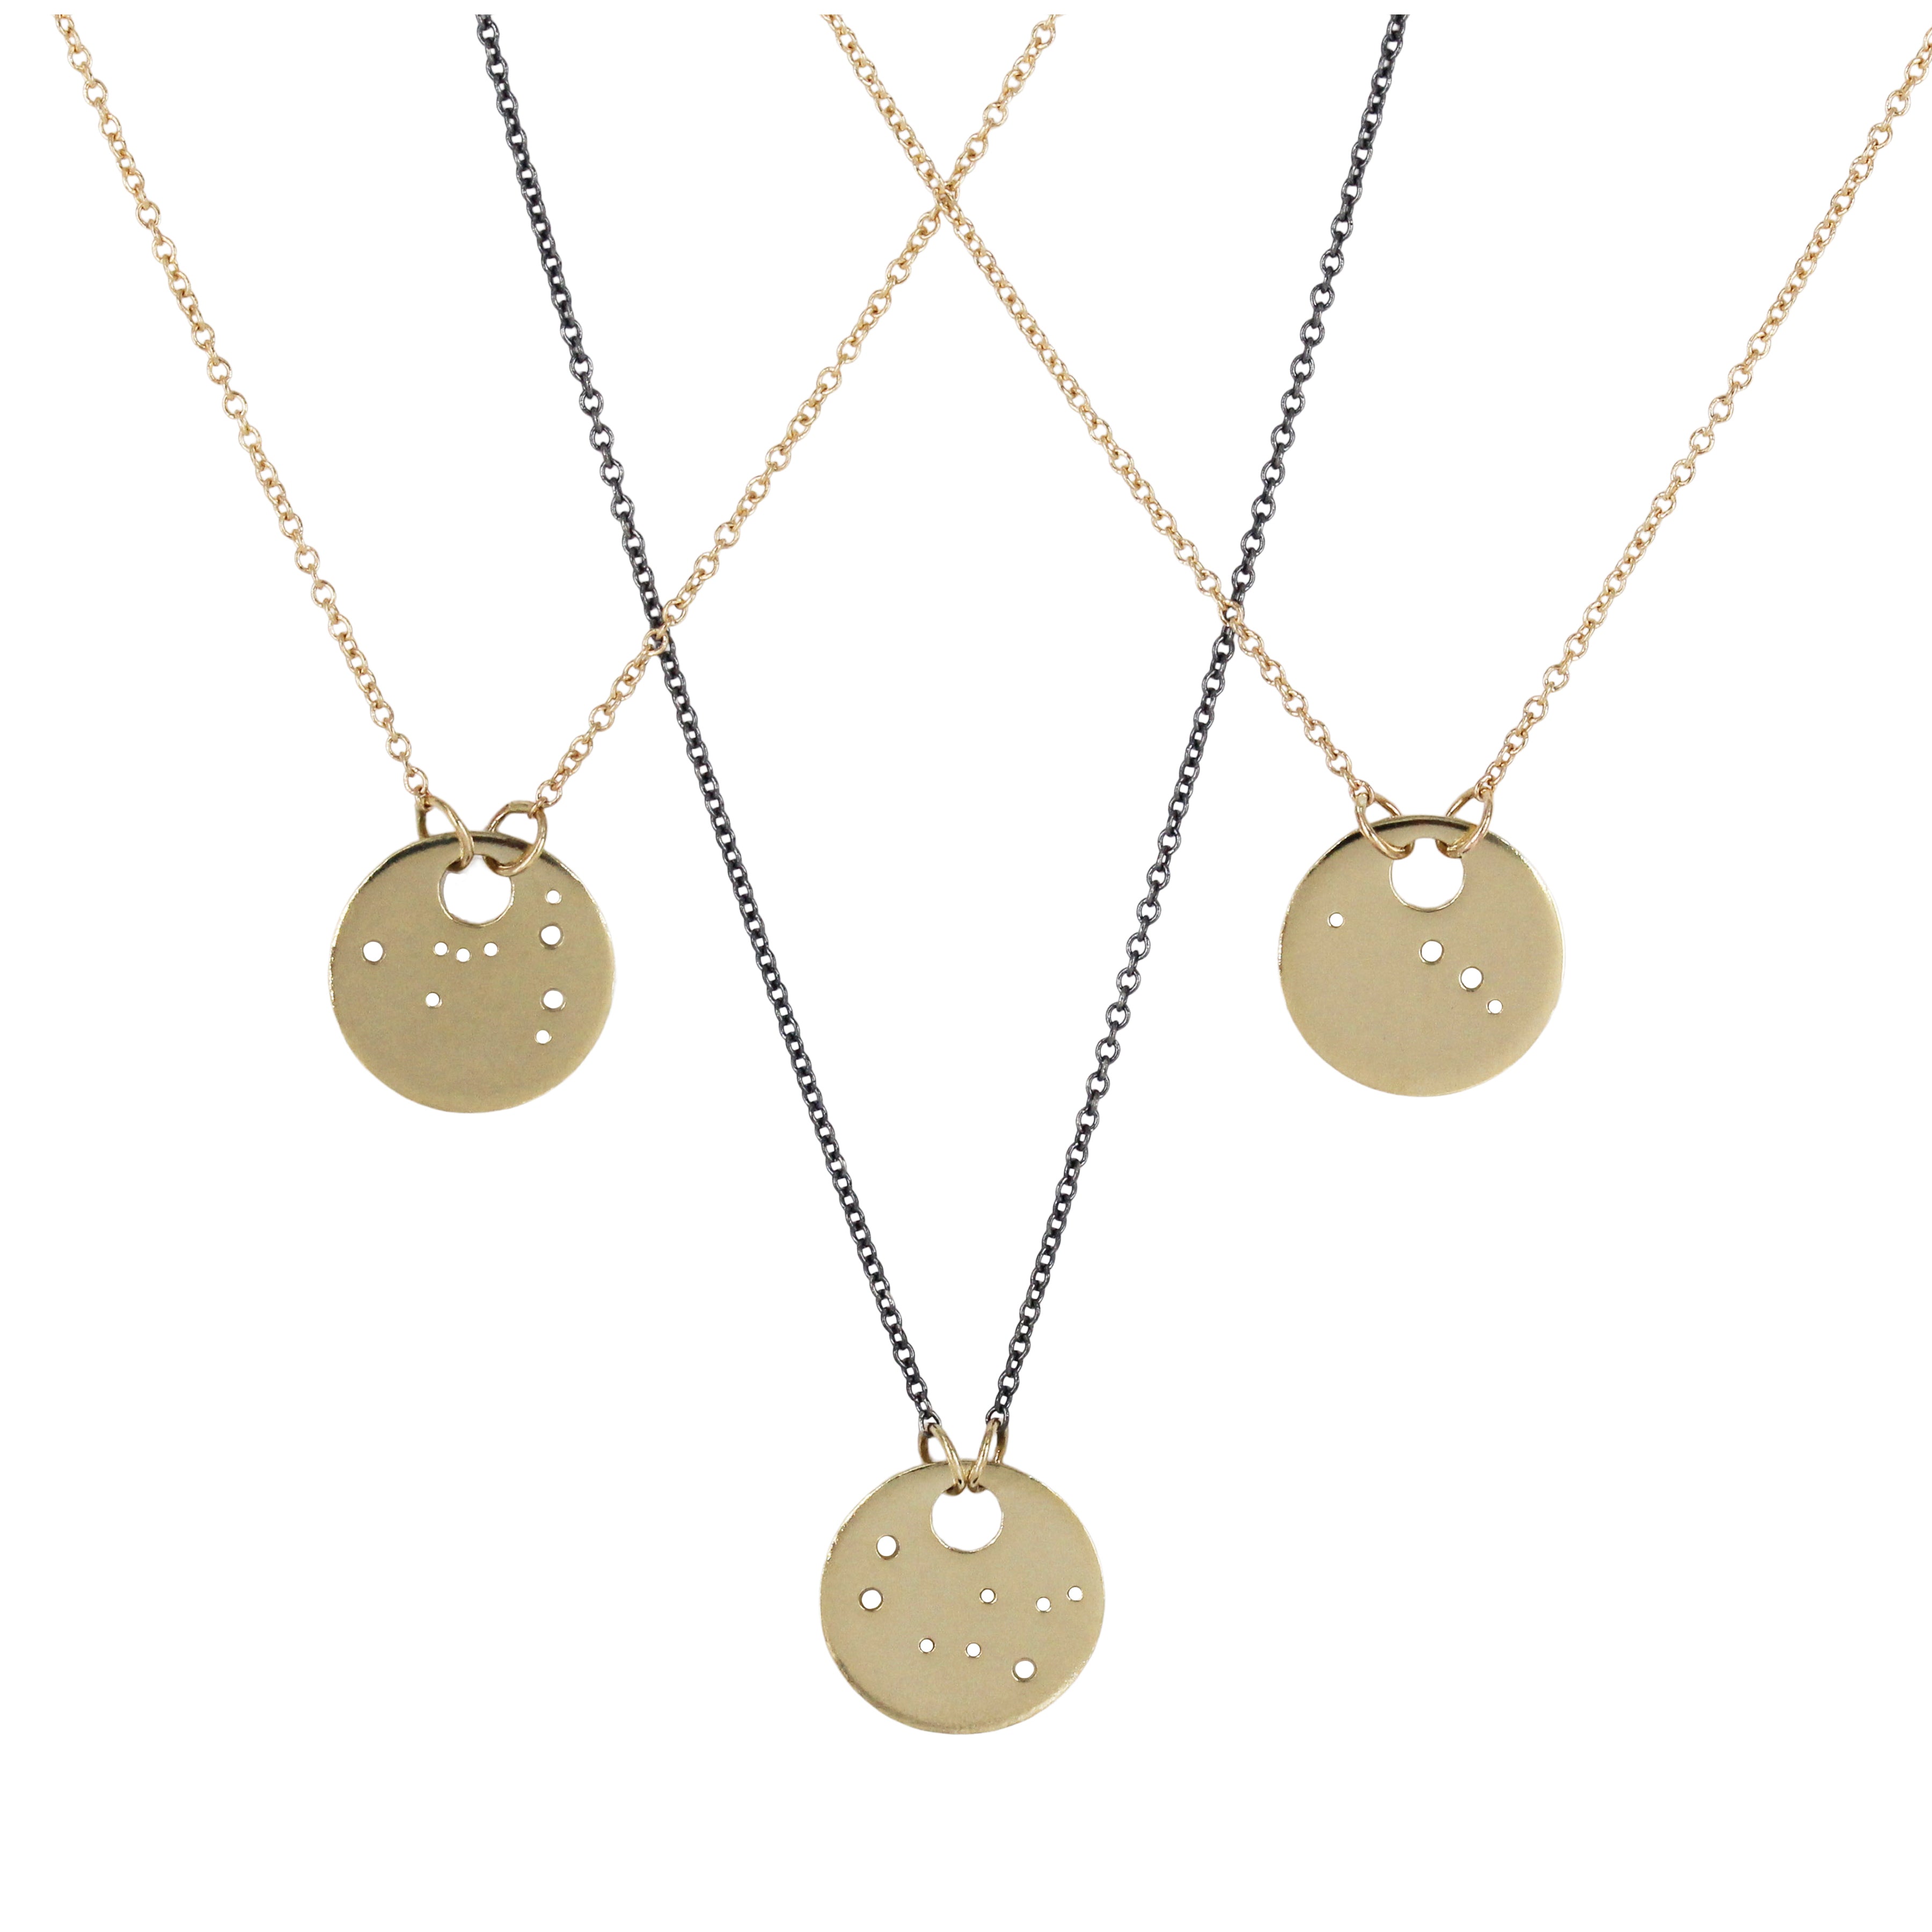 Aries 14k Yellow Gold Zodiac Constellation Necklace